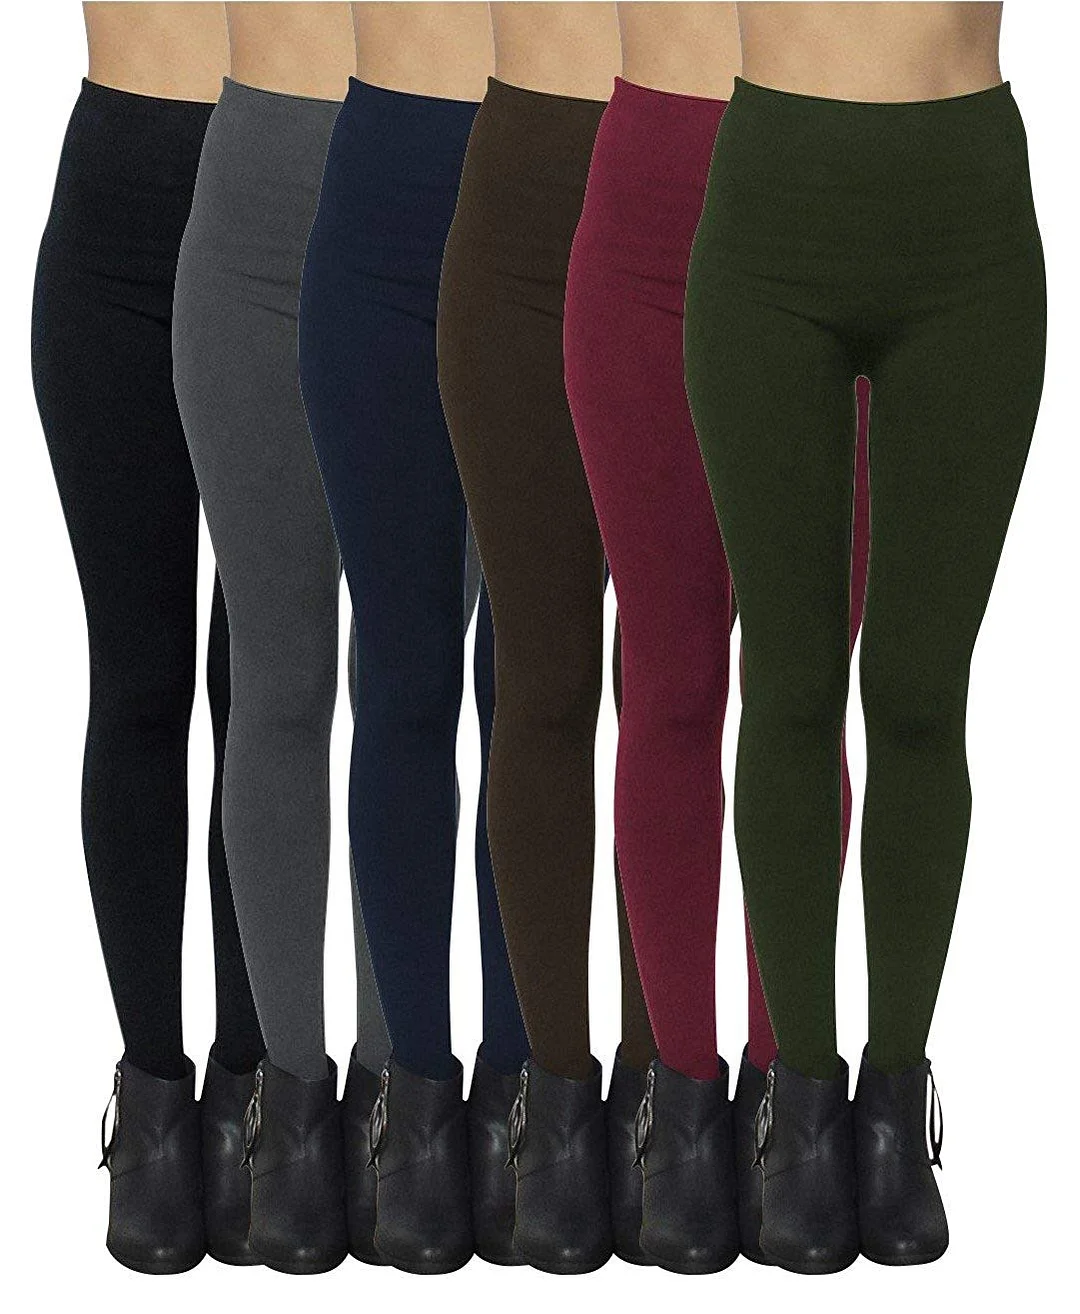 6 Pack Seamless Fleece Lined Leggings for Women - Winter, Workout & Everyday Use - One Size